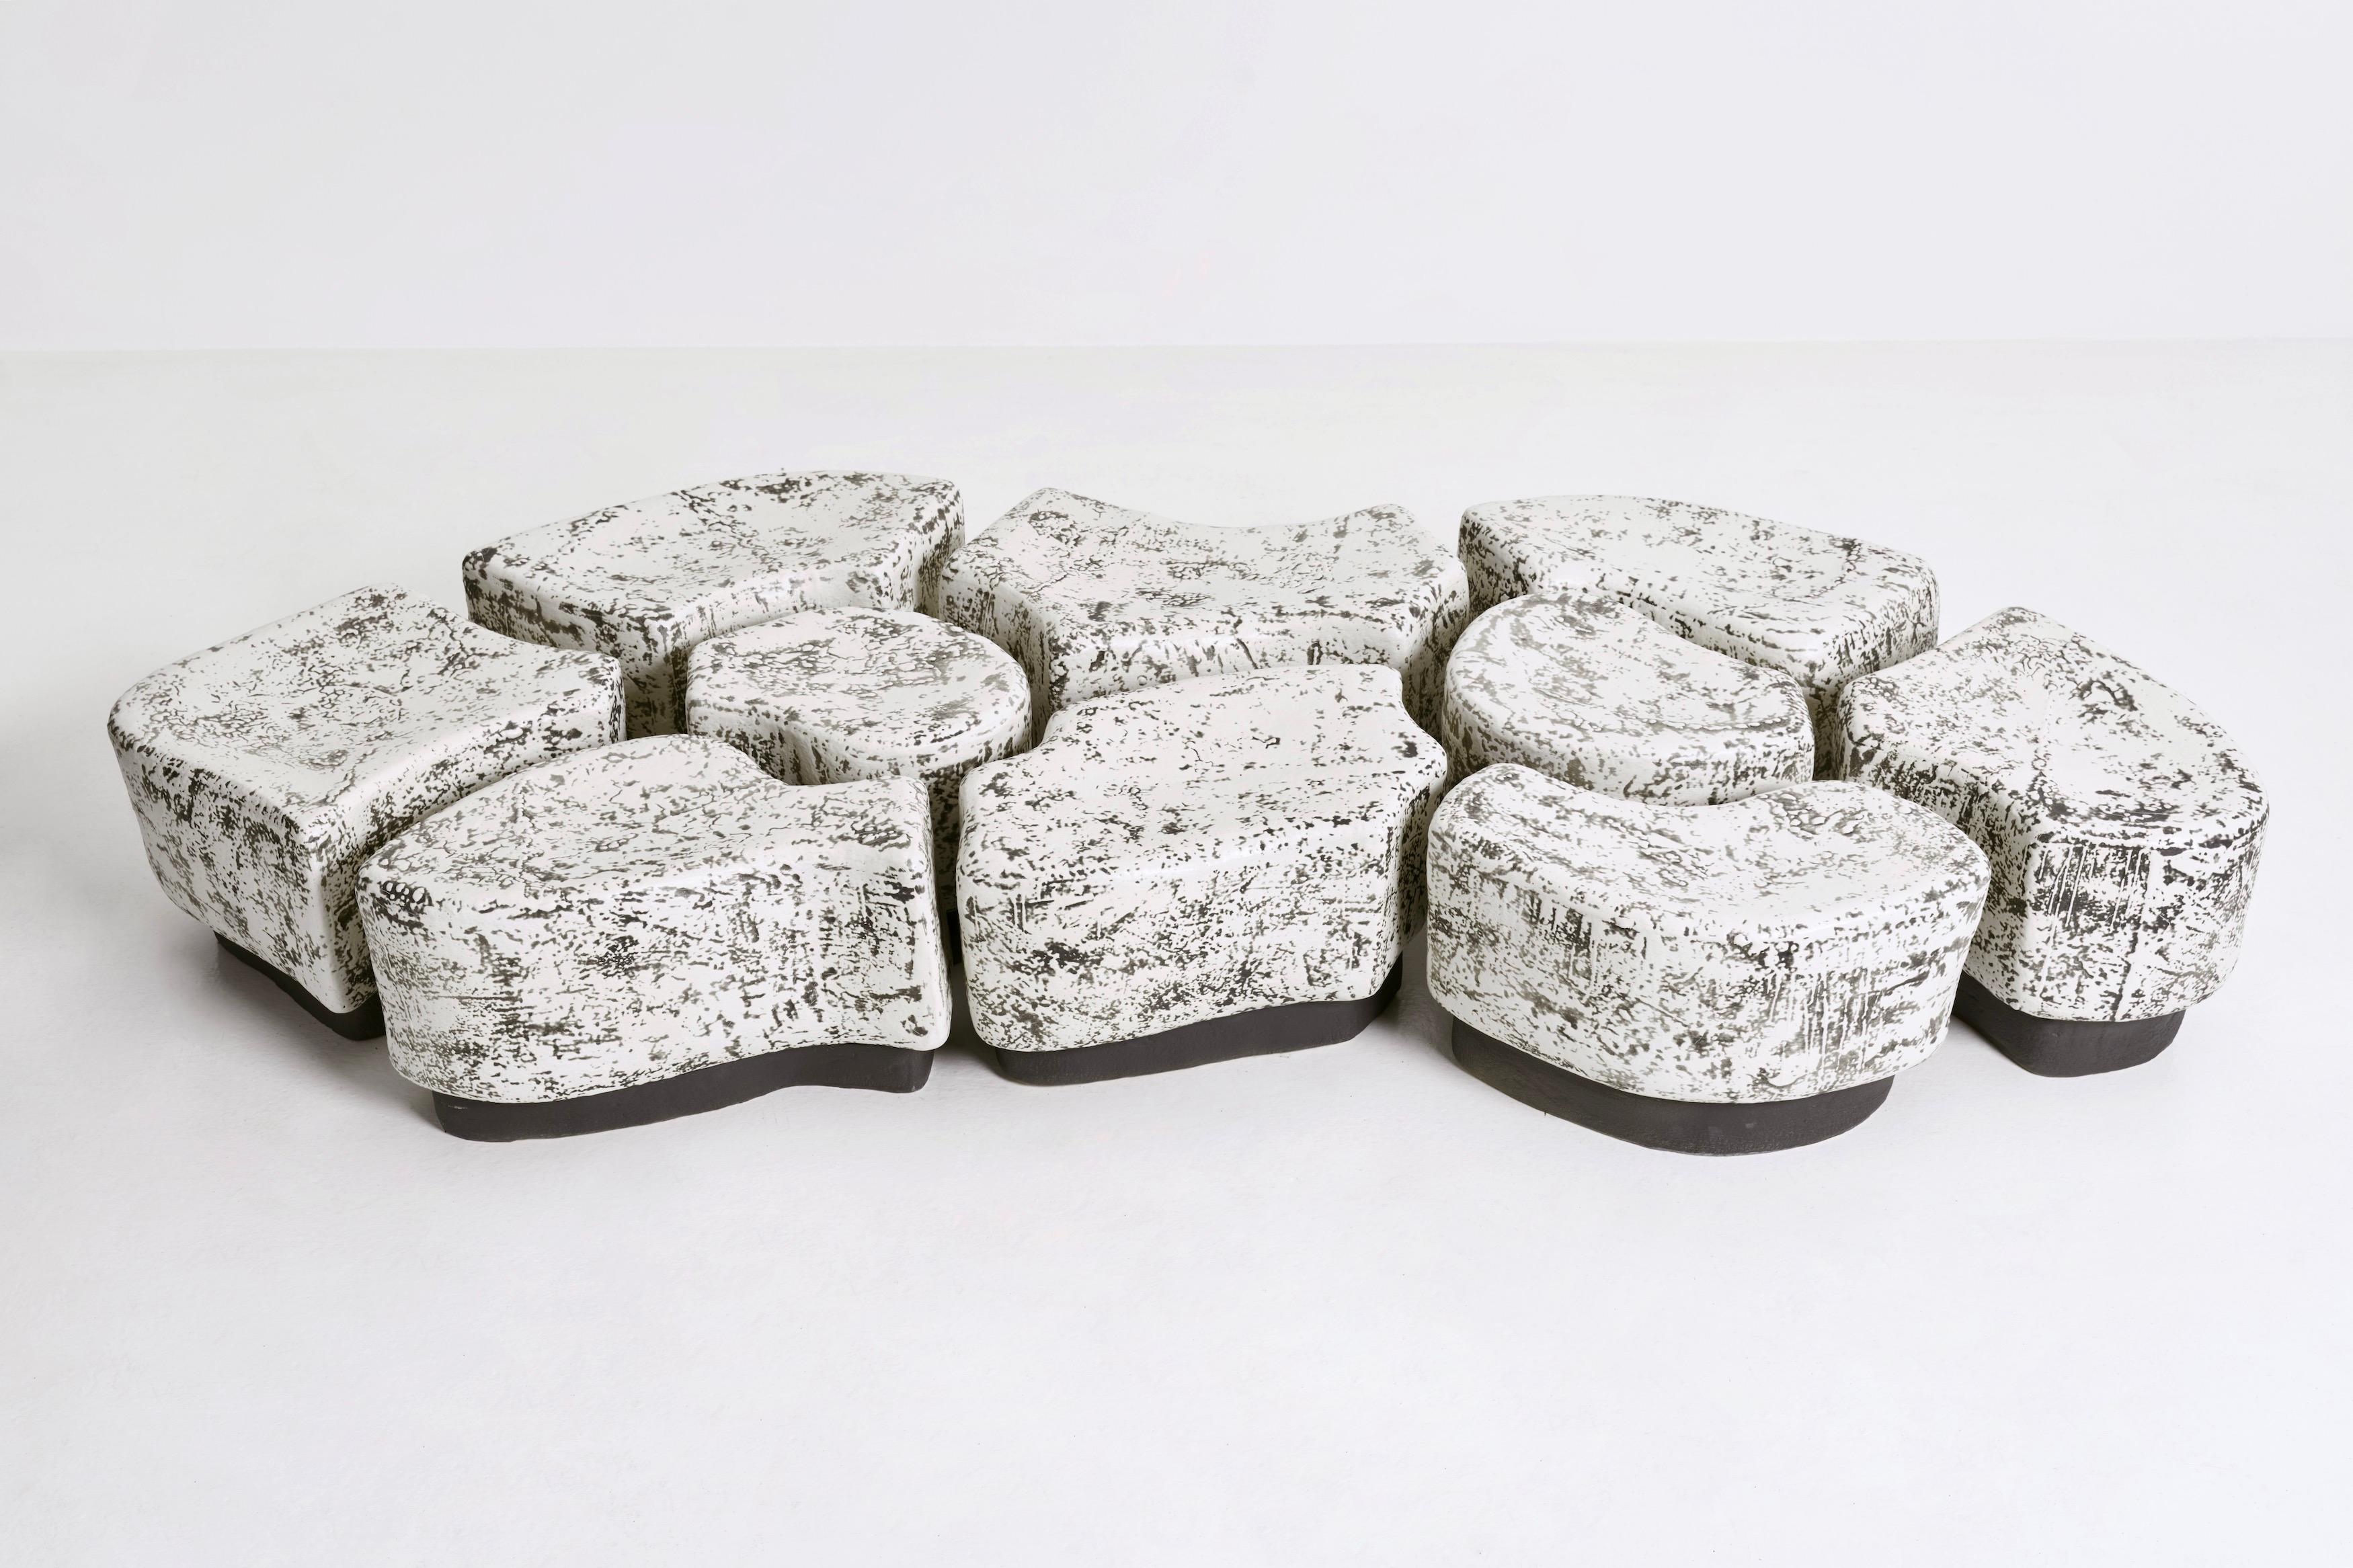 Organic Modern Contemporary Ceramic Coffee Table by Agnès Debizet, 2022 For Sale